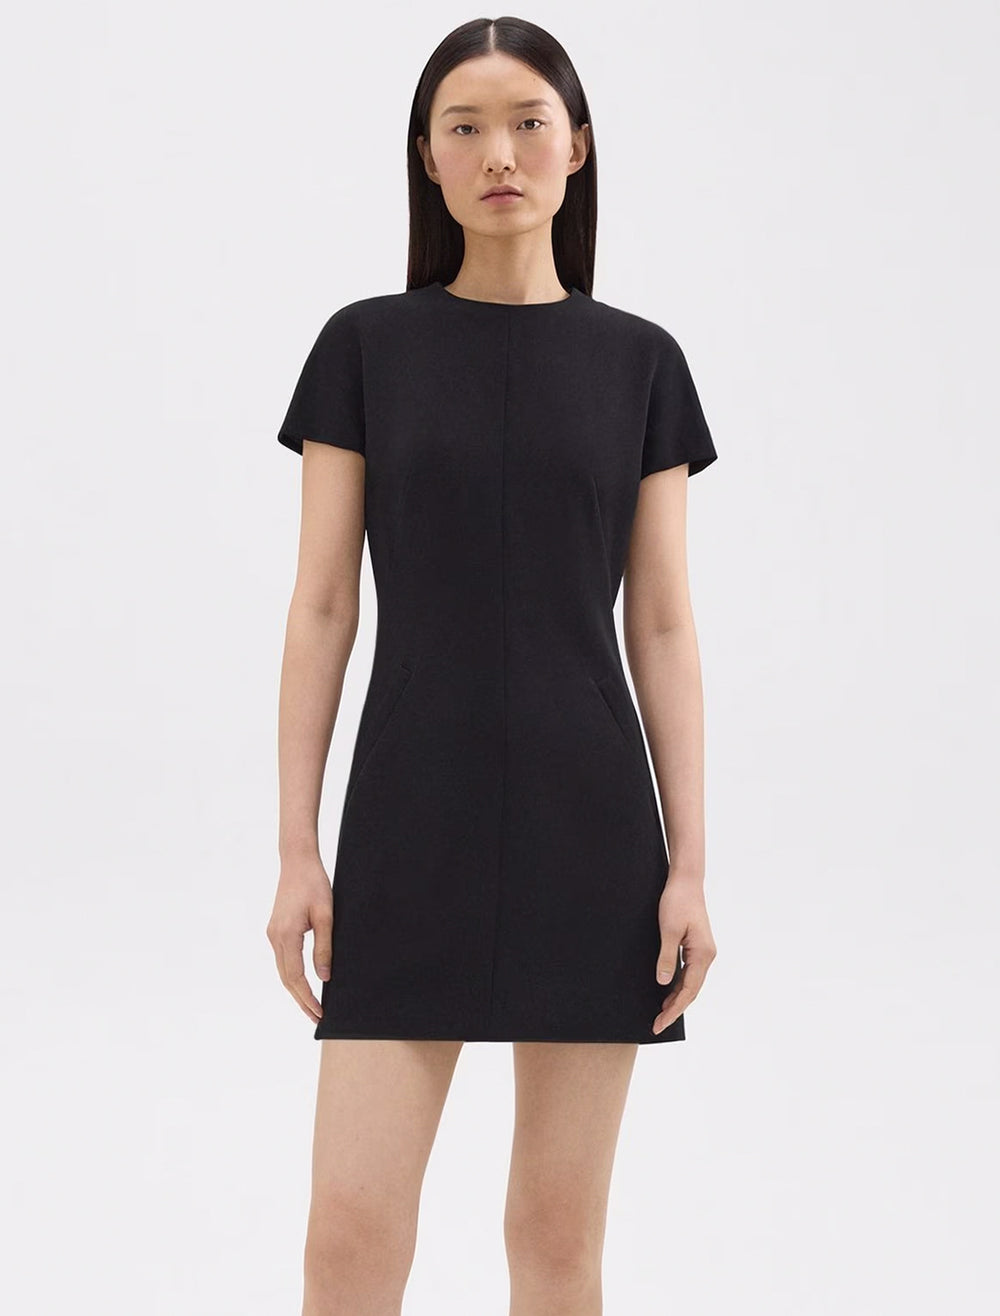 Model wearing Theory's dolman short sleeve admirable crepe dress in black.